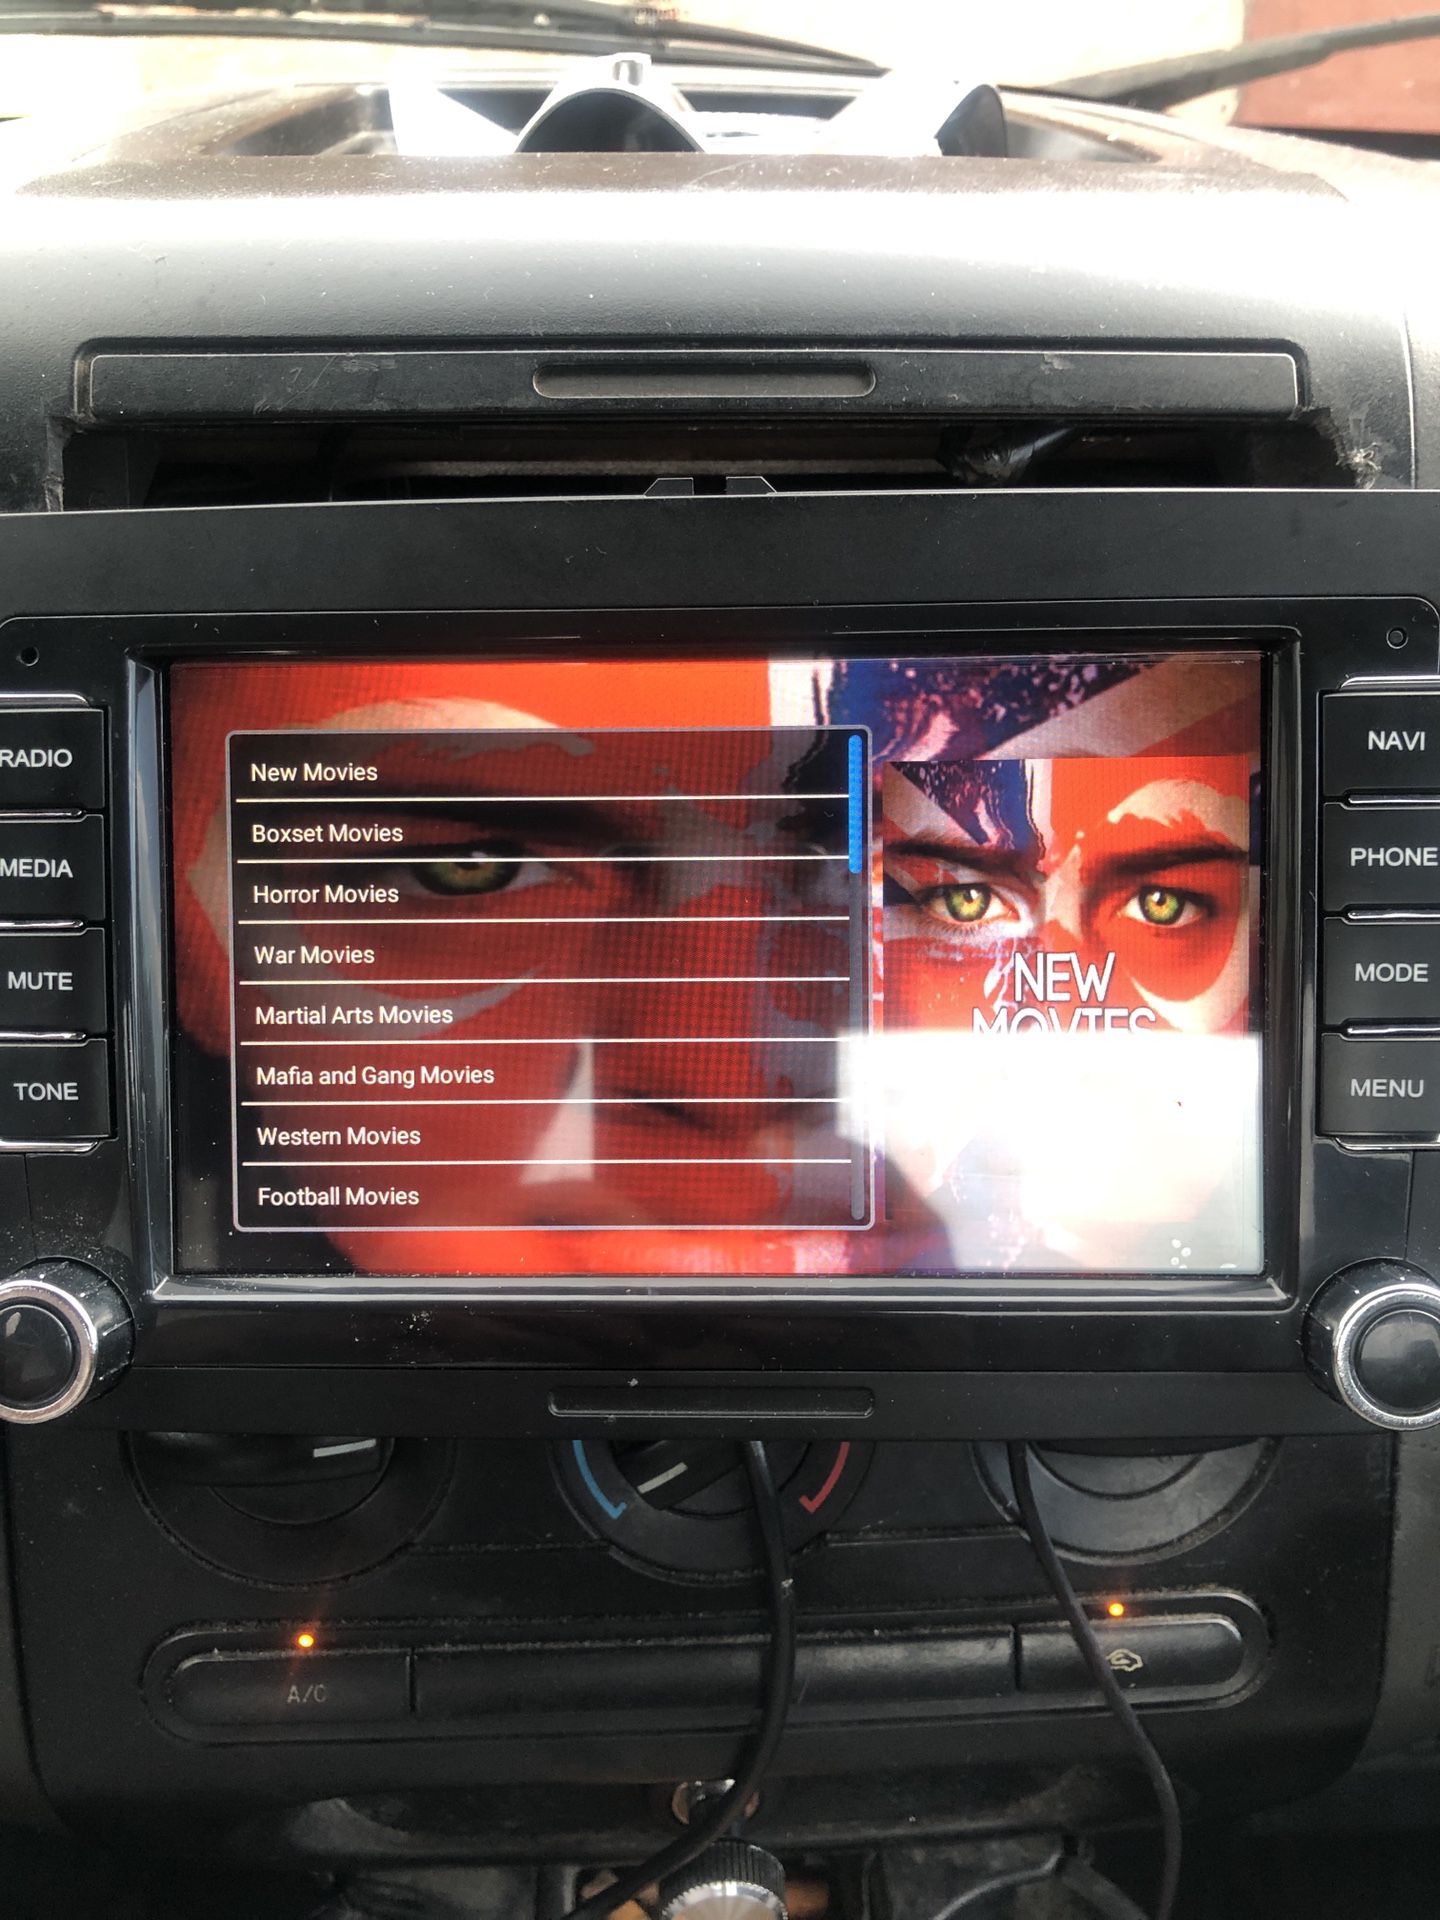 VOLKSWAGEN ANDROID TOUCH SCREEN RADIO $125